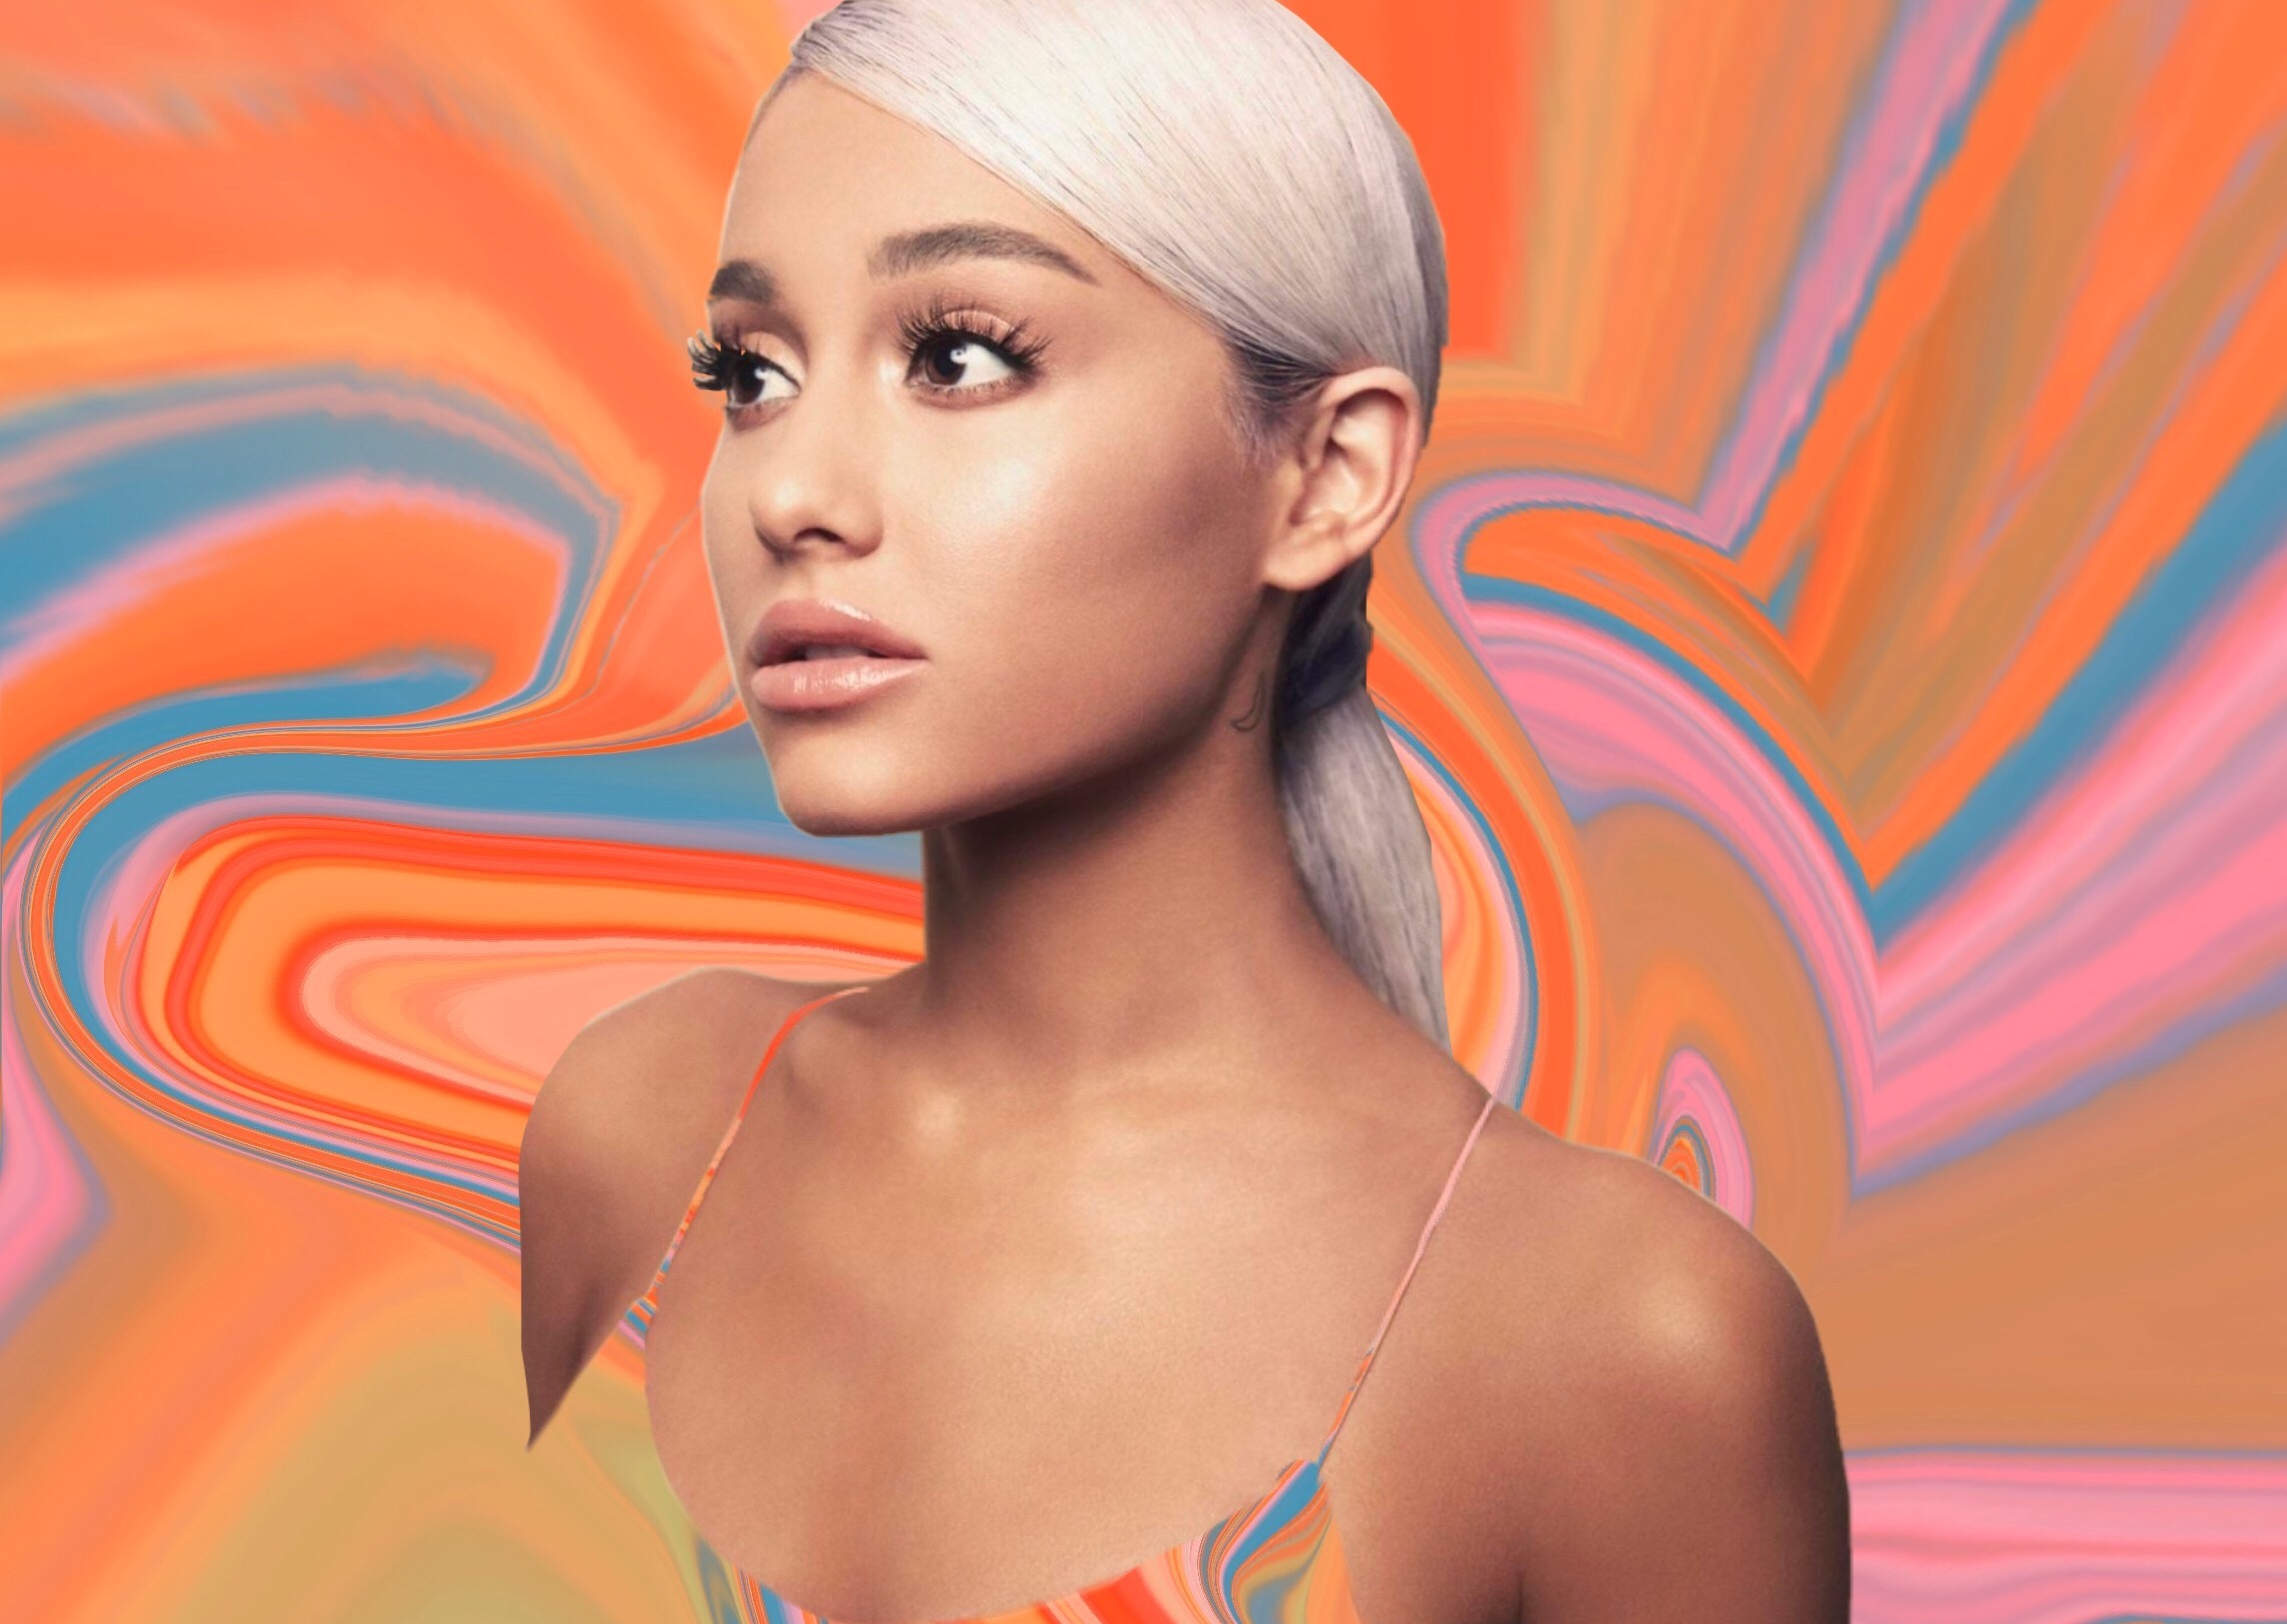 7 Ariana Grande Masterpieces To Freak Out Over While